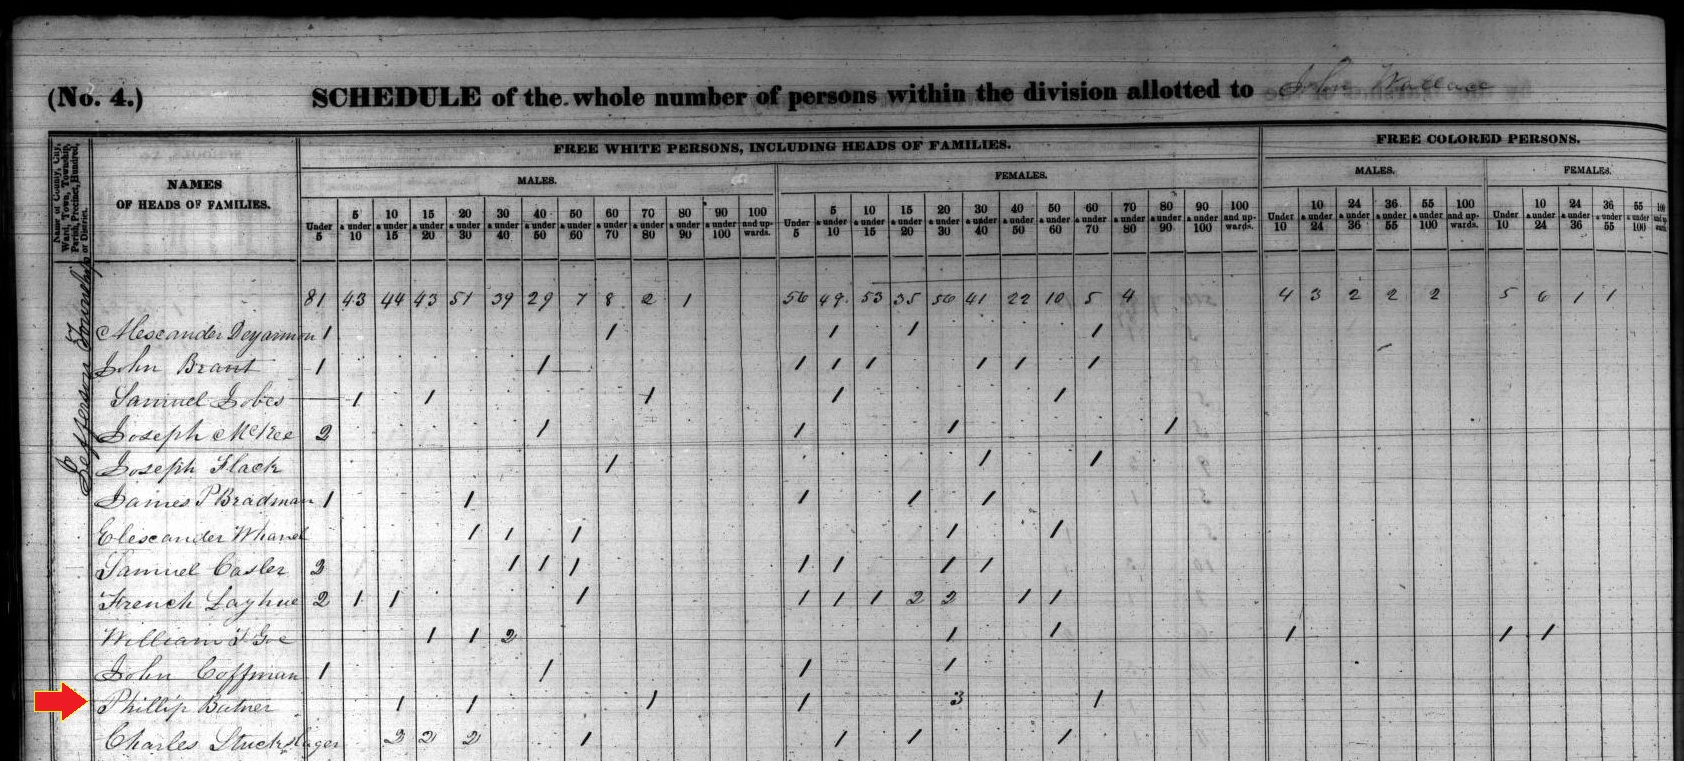 The Philip-Bortner household in the 1840 census of Fayette County, Pennsylvania.